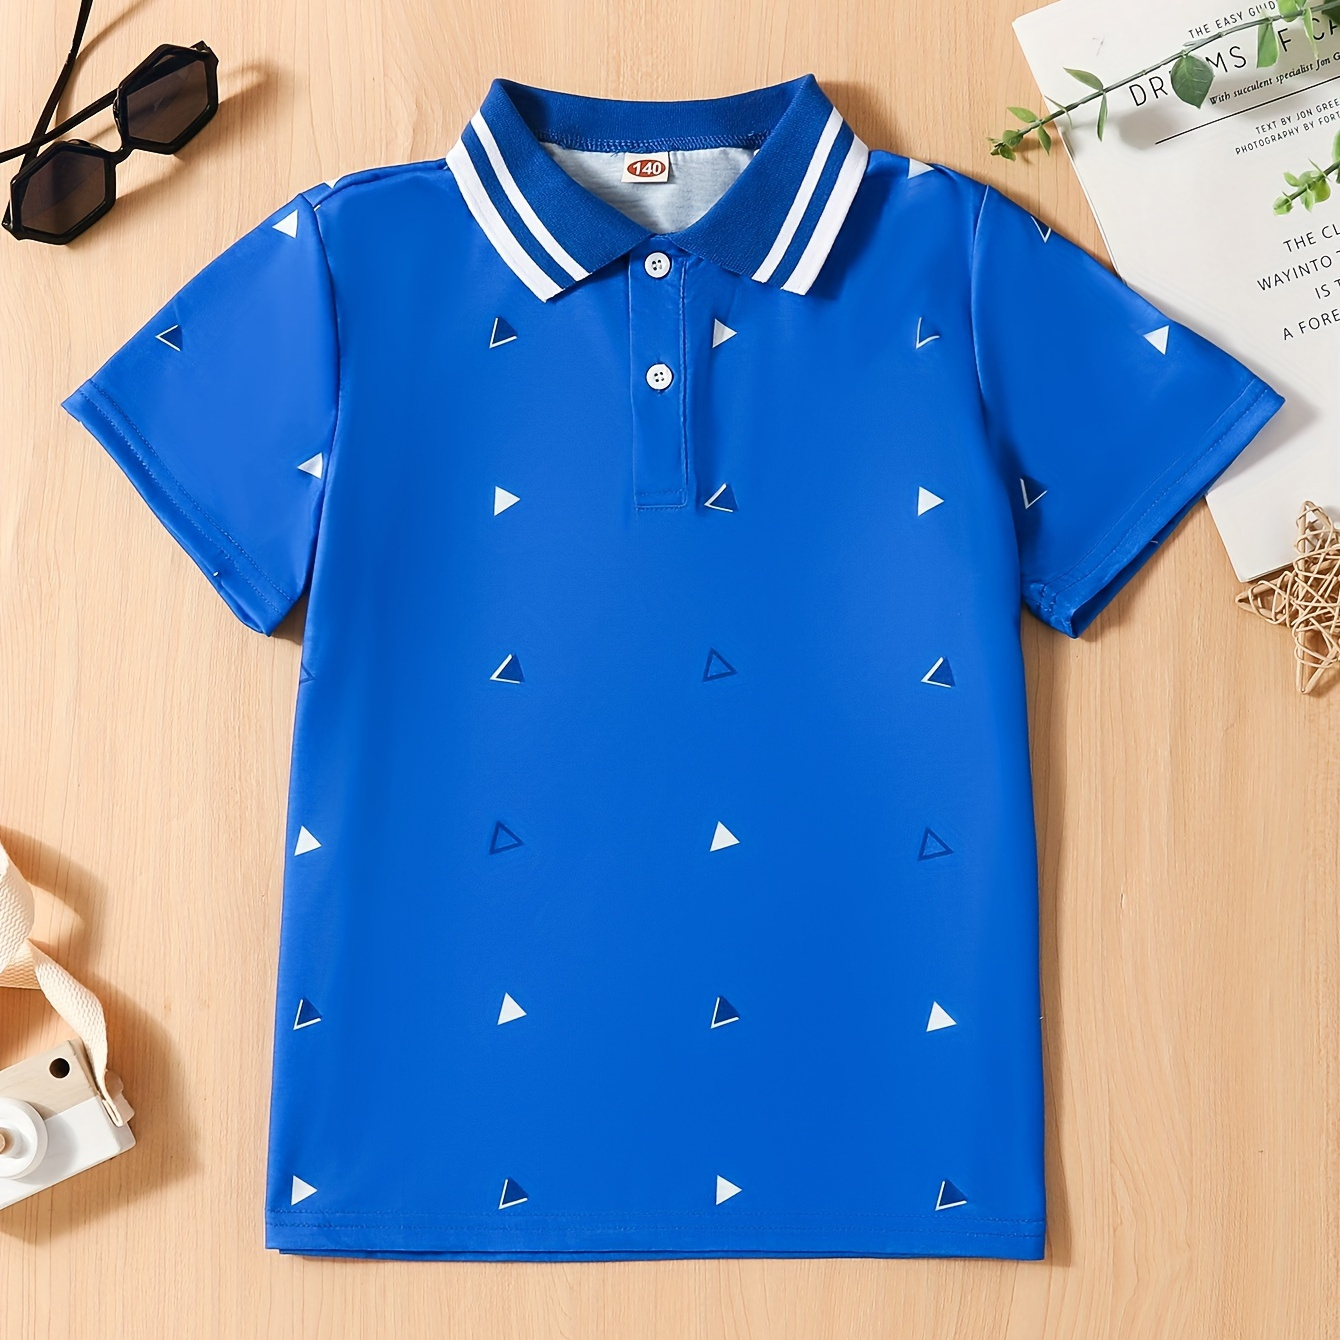 

Boys Triangle Pattern Print Lapel Shirt, Kids Toddler Short Sleeve Comfy Summer Spring Clothes